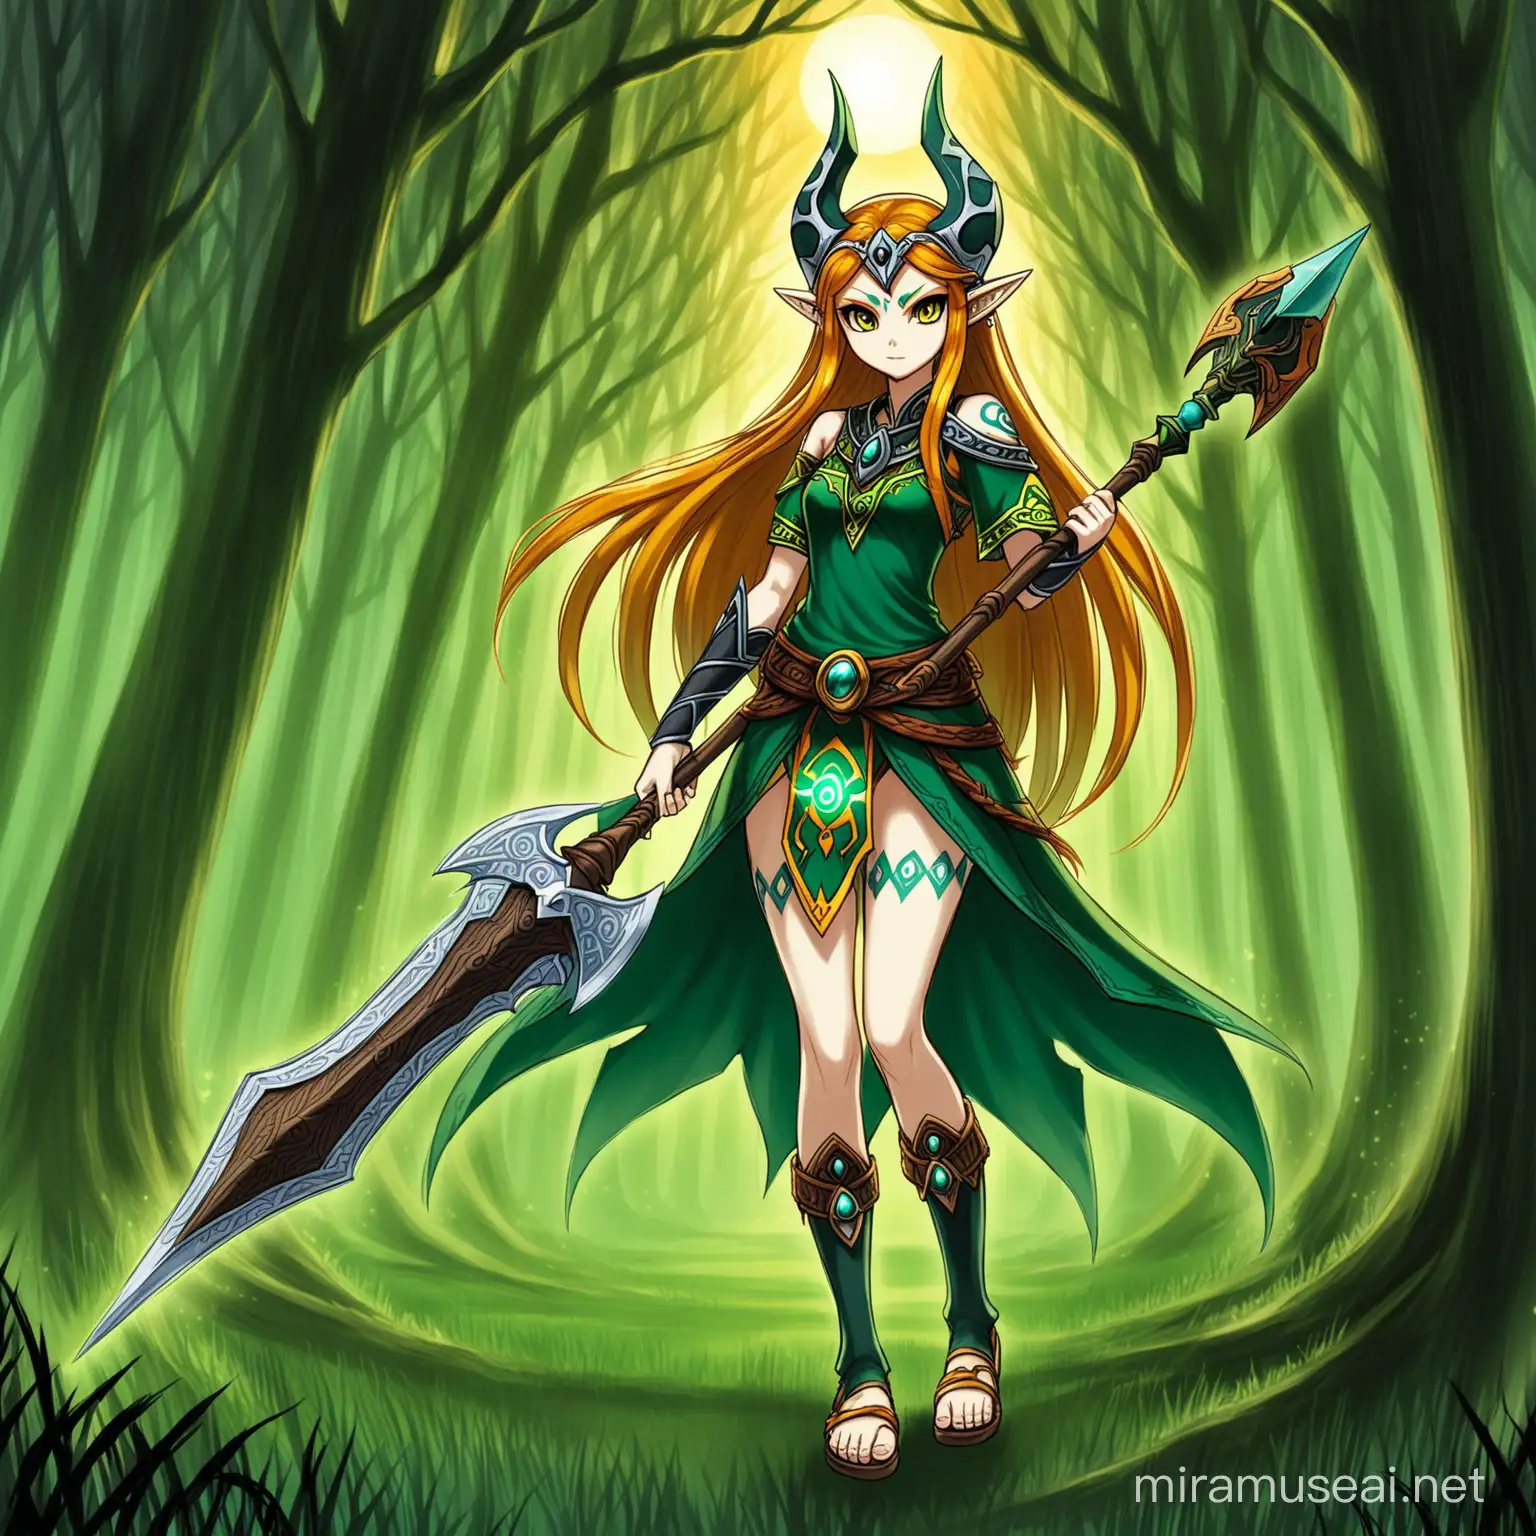 Midna Twilight Princess with Halberd Casting Spell in Haunted Forest